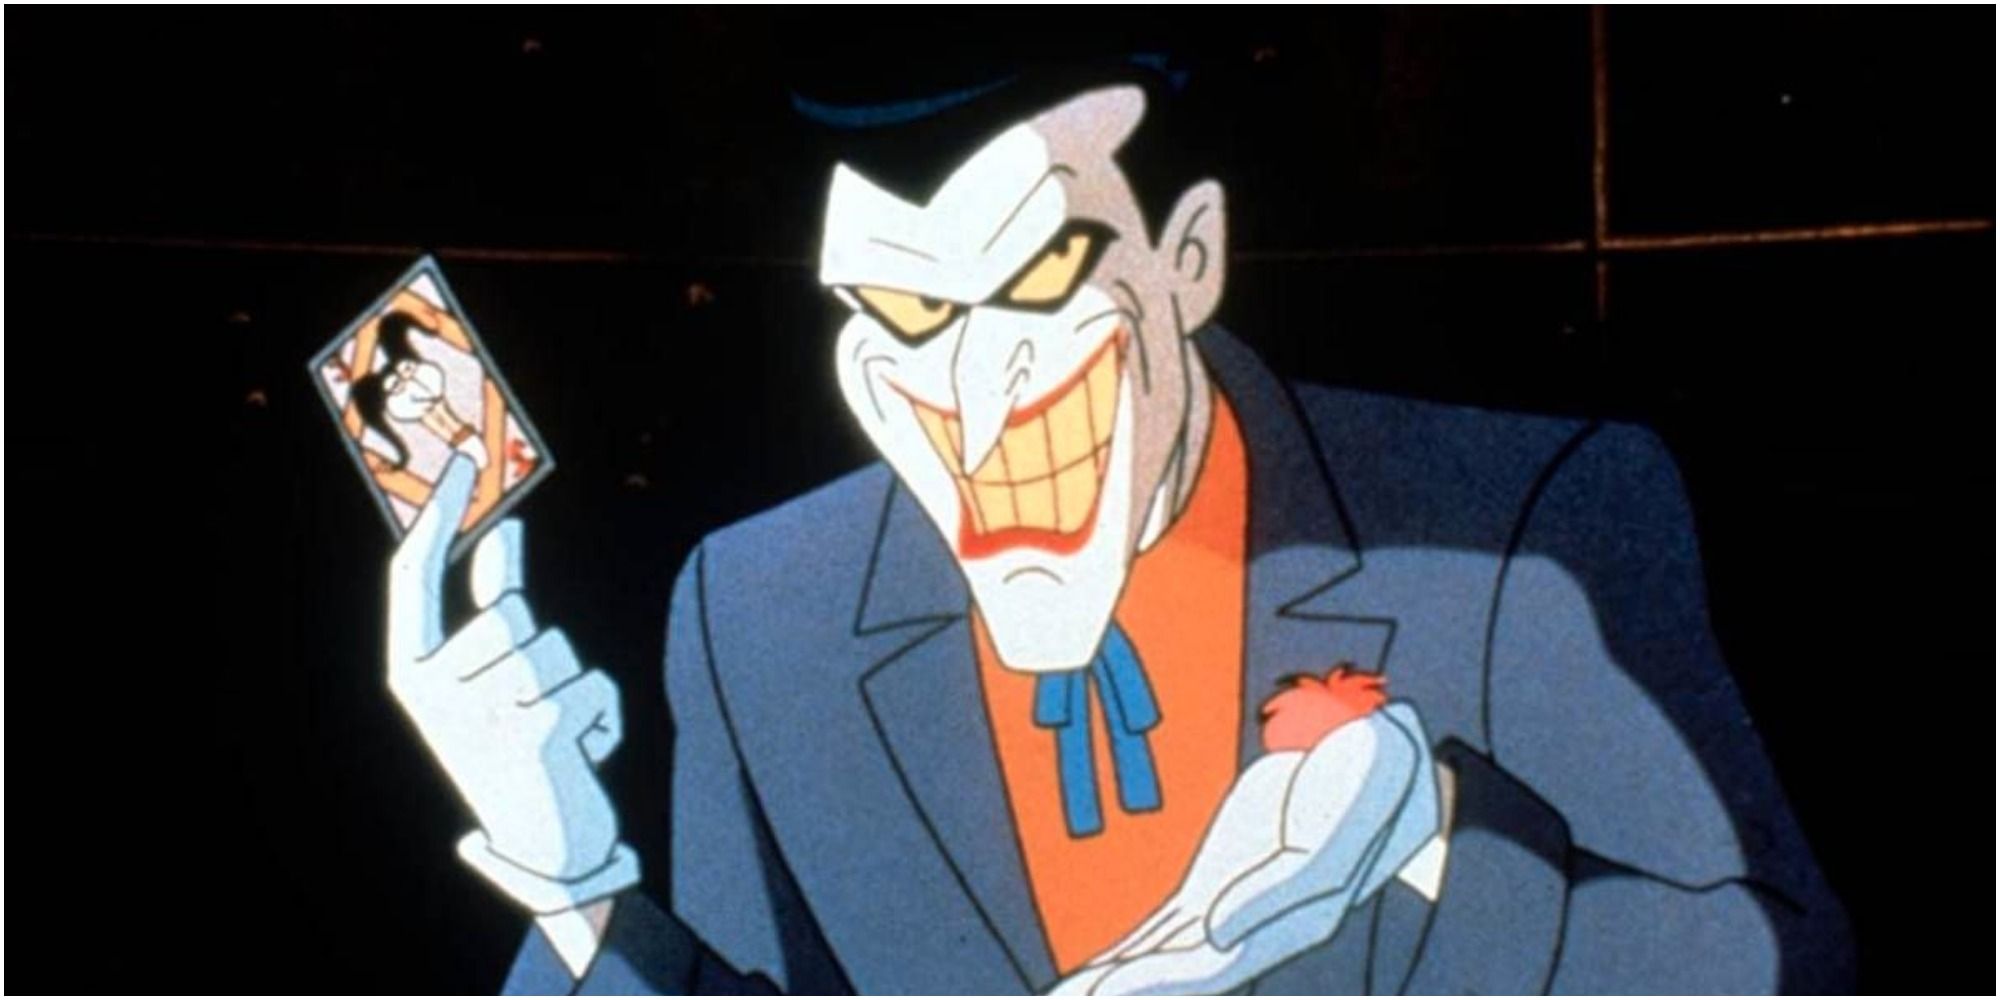 The Joker from Batman The Animated Series